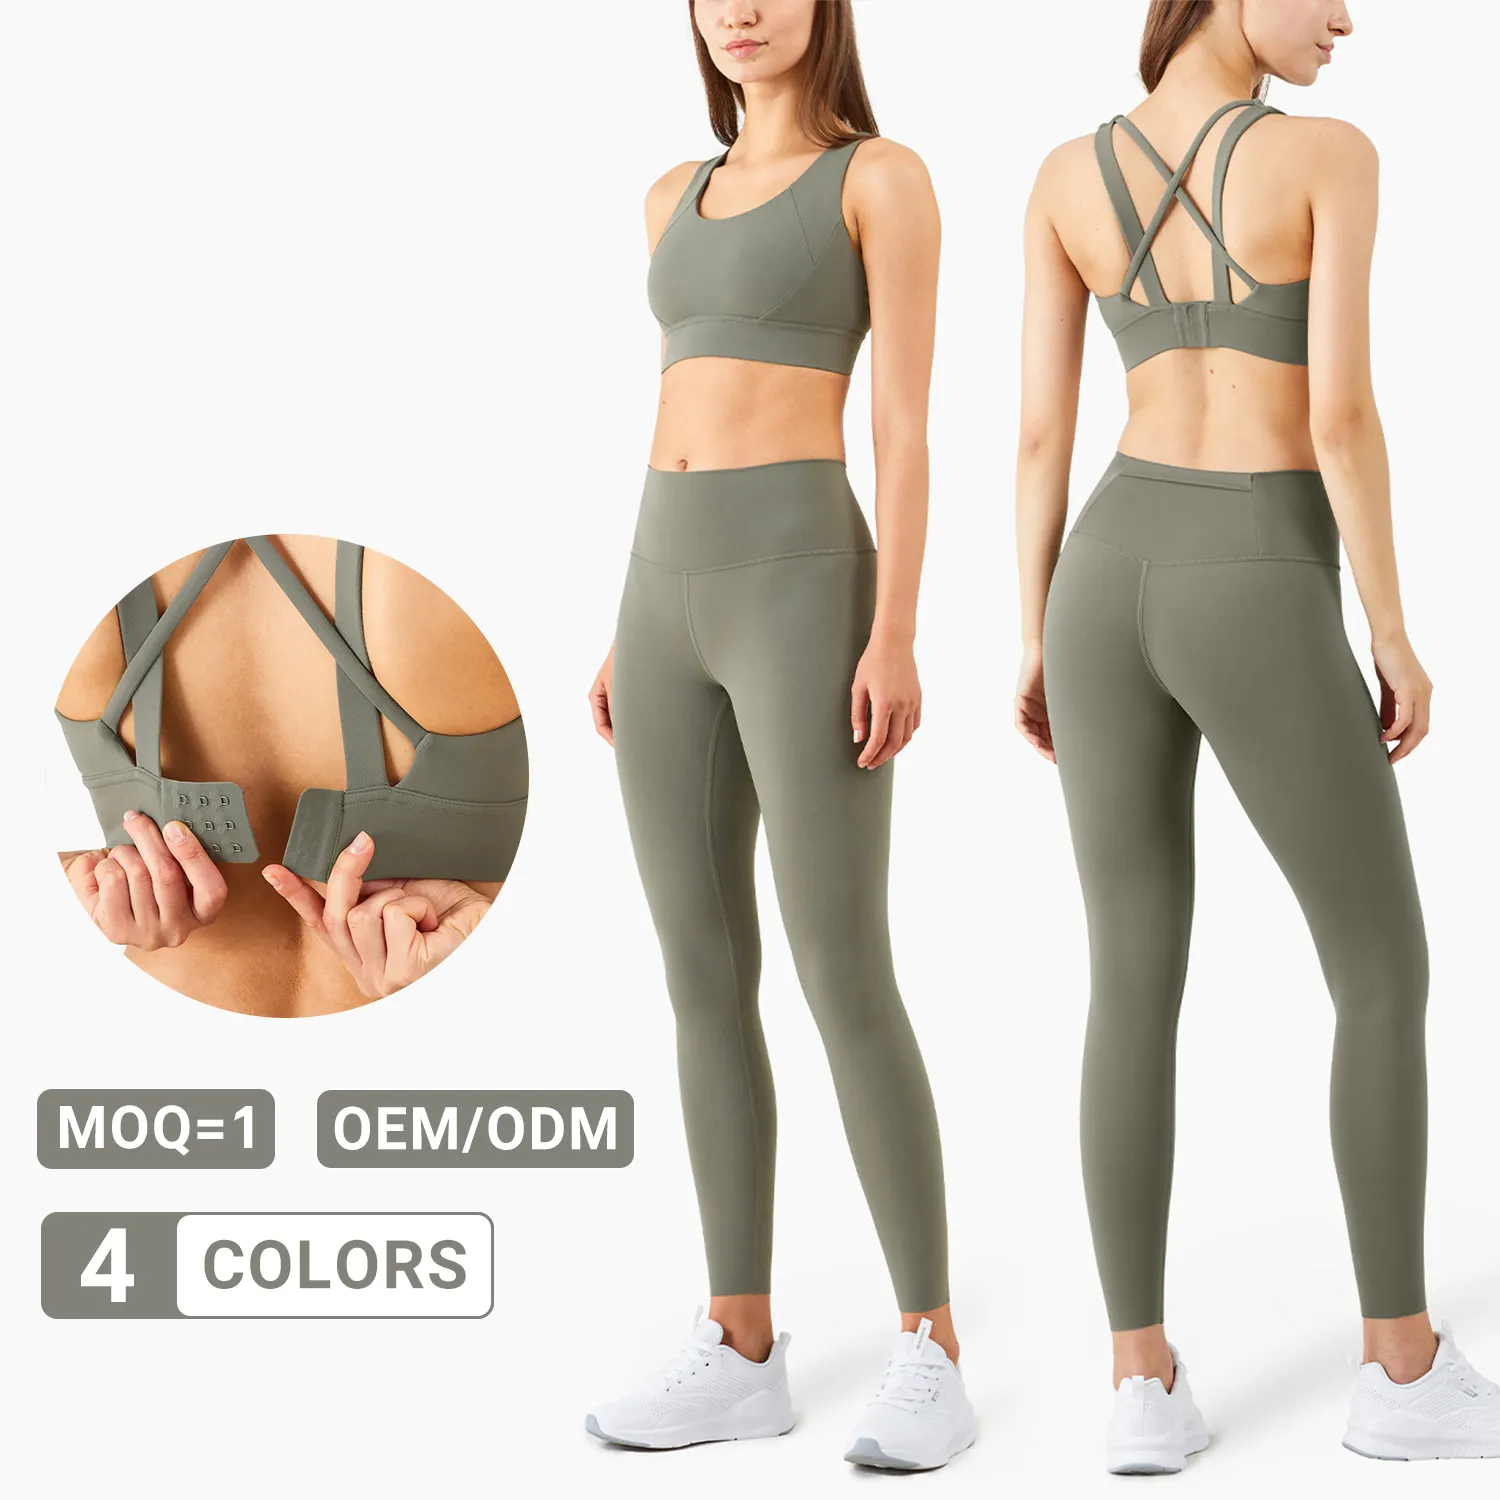 Women Seamless Active Suit Exercise Clothes Athletic Apparel Sport Wear Gym Gear Fitness Garment Workout Clothing Yoga Set